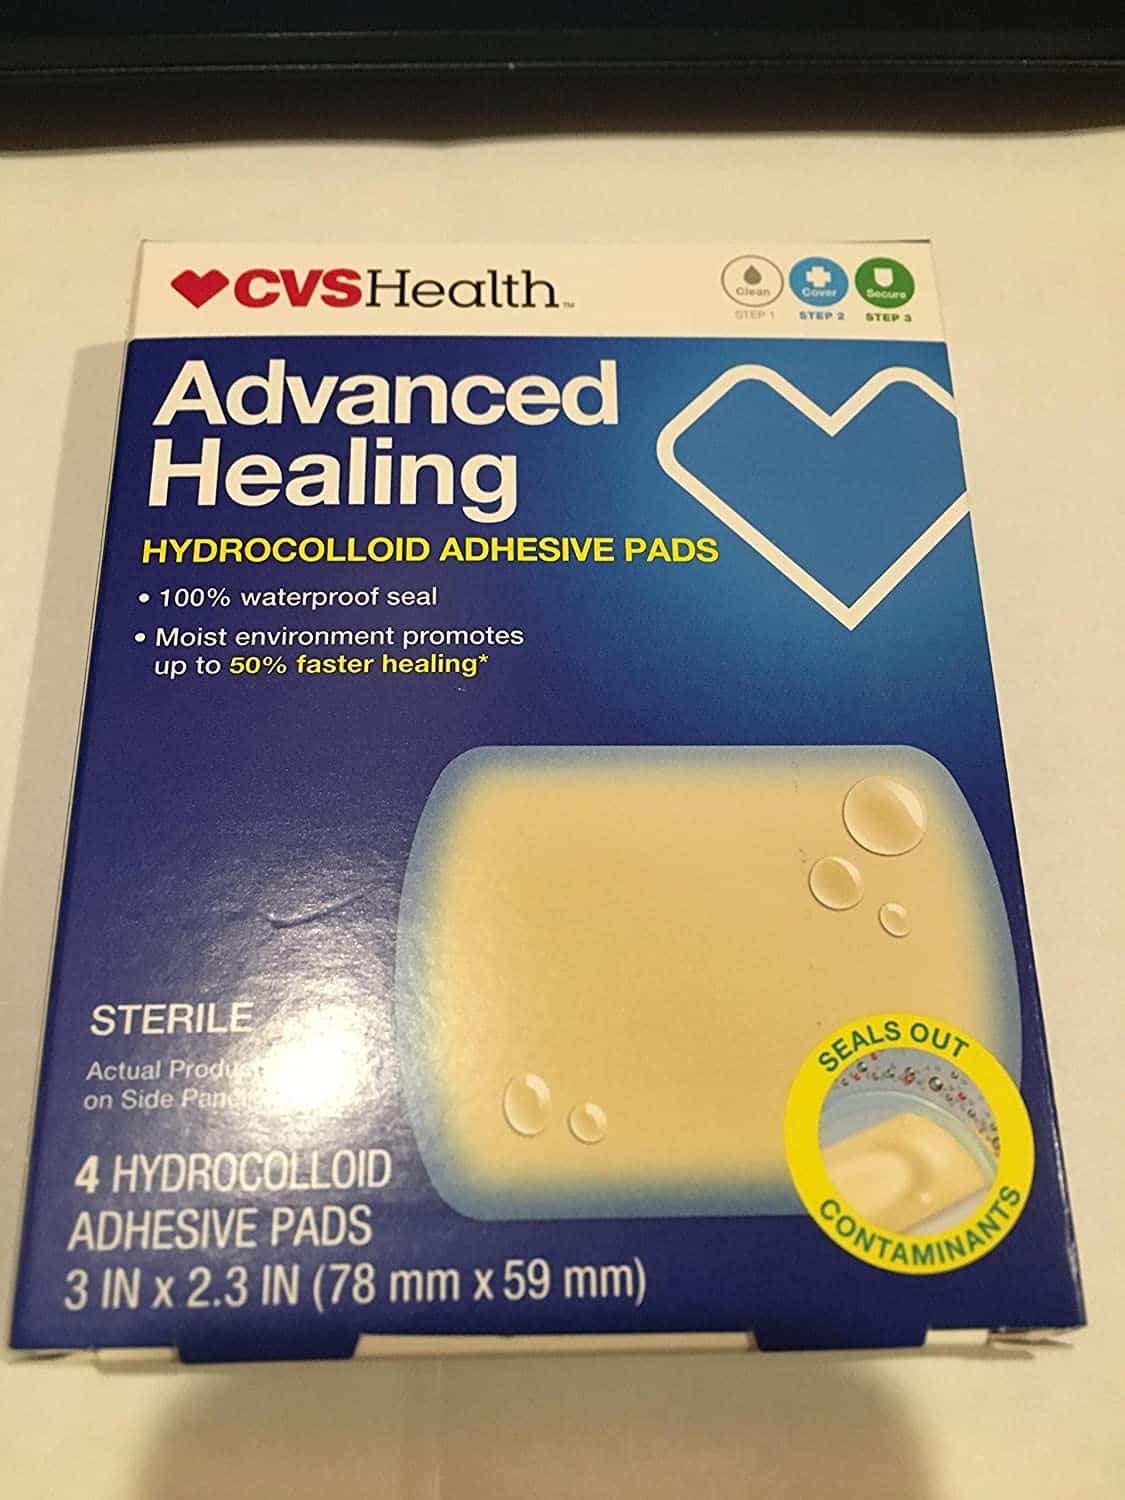 Do Hydrocolloid Bandages Work for Blackheads?